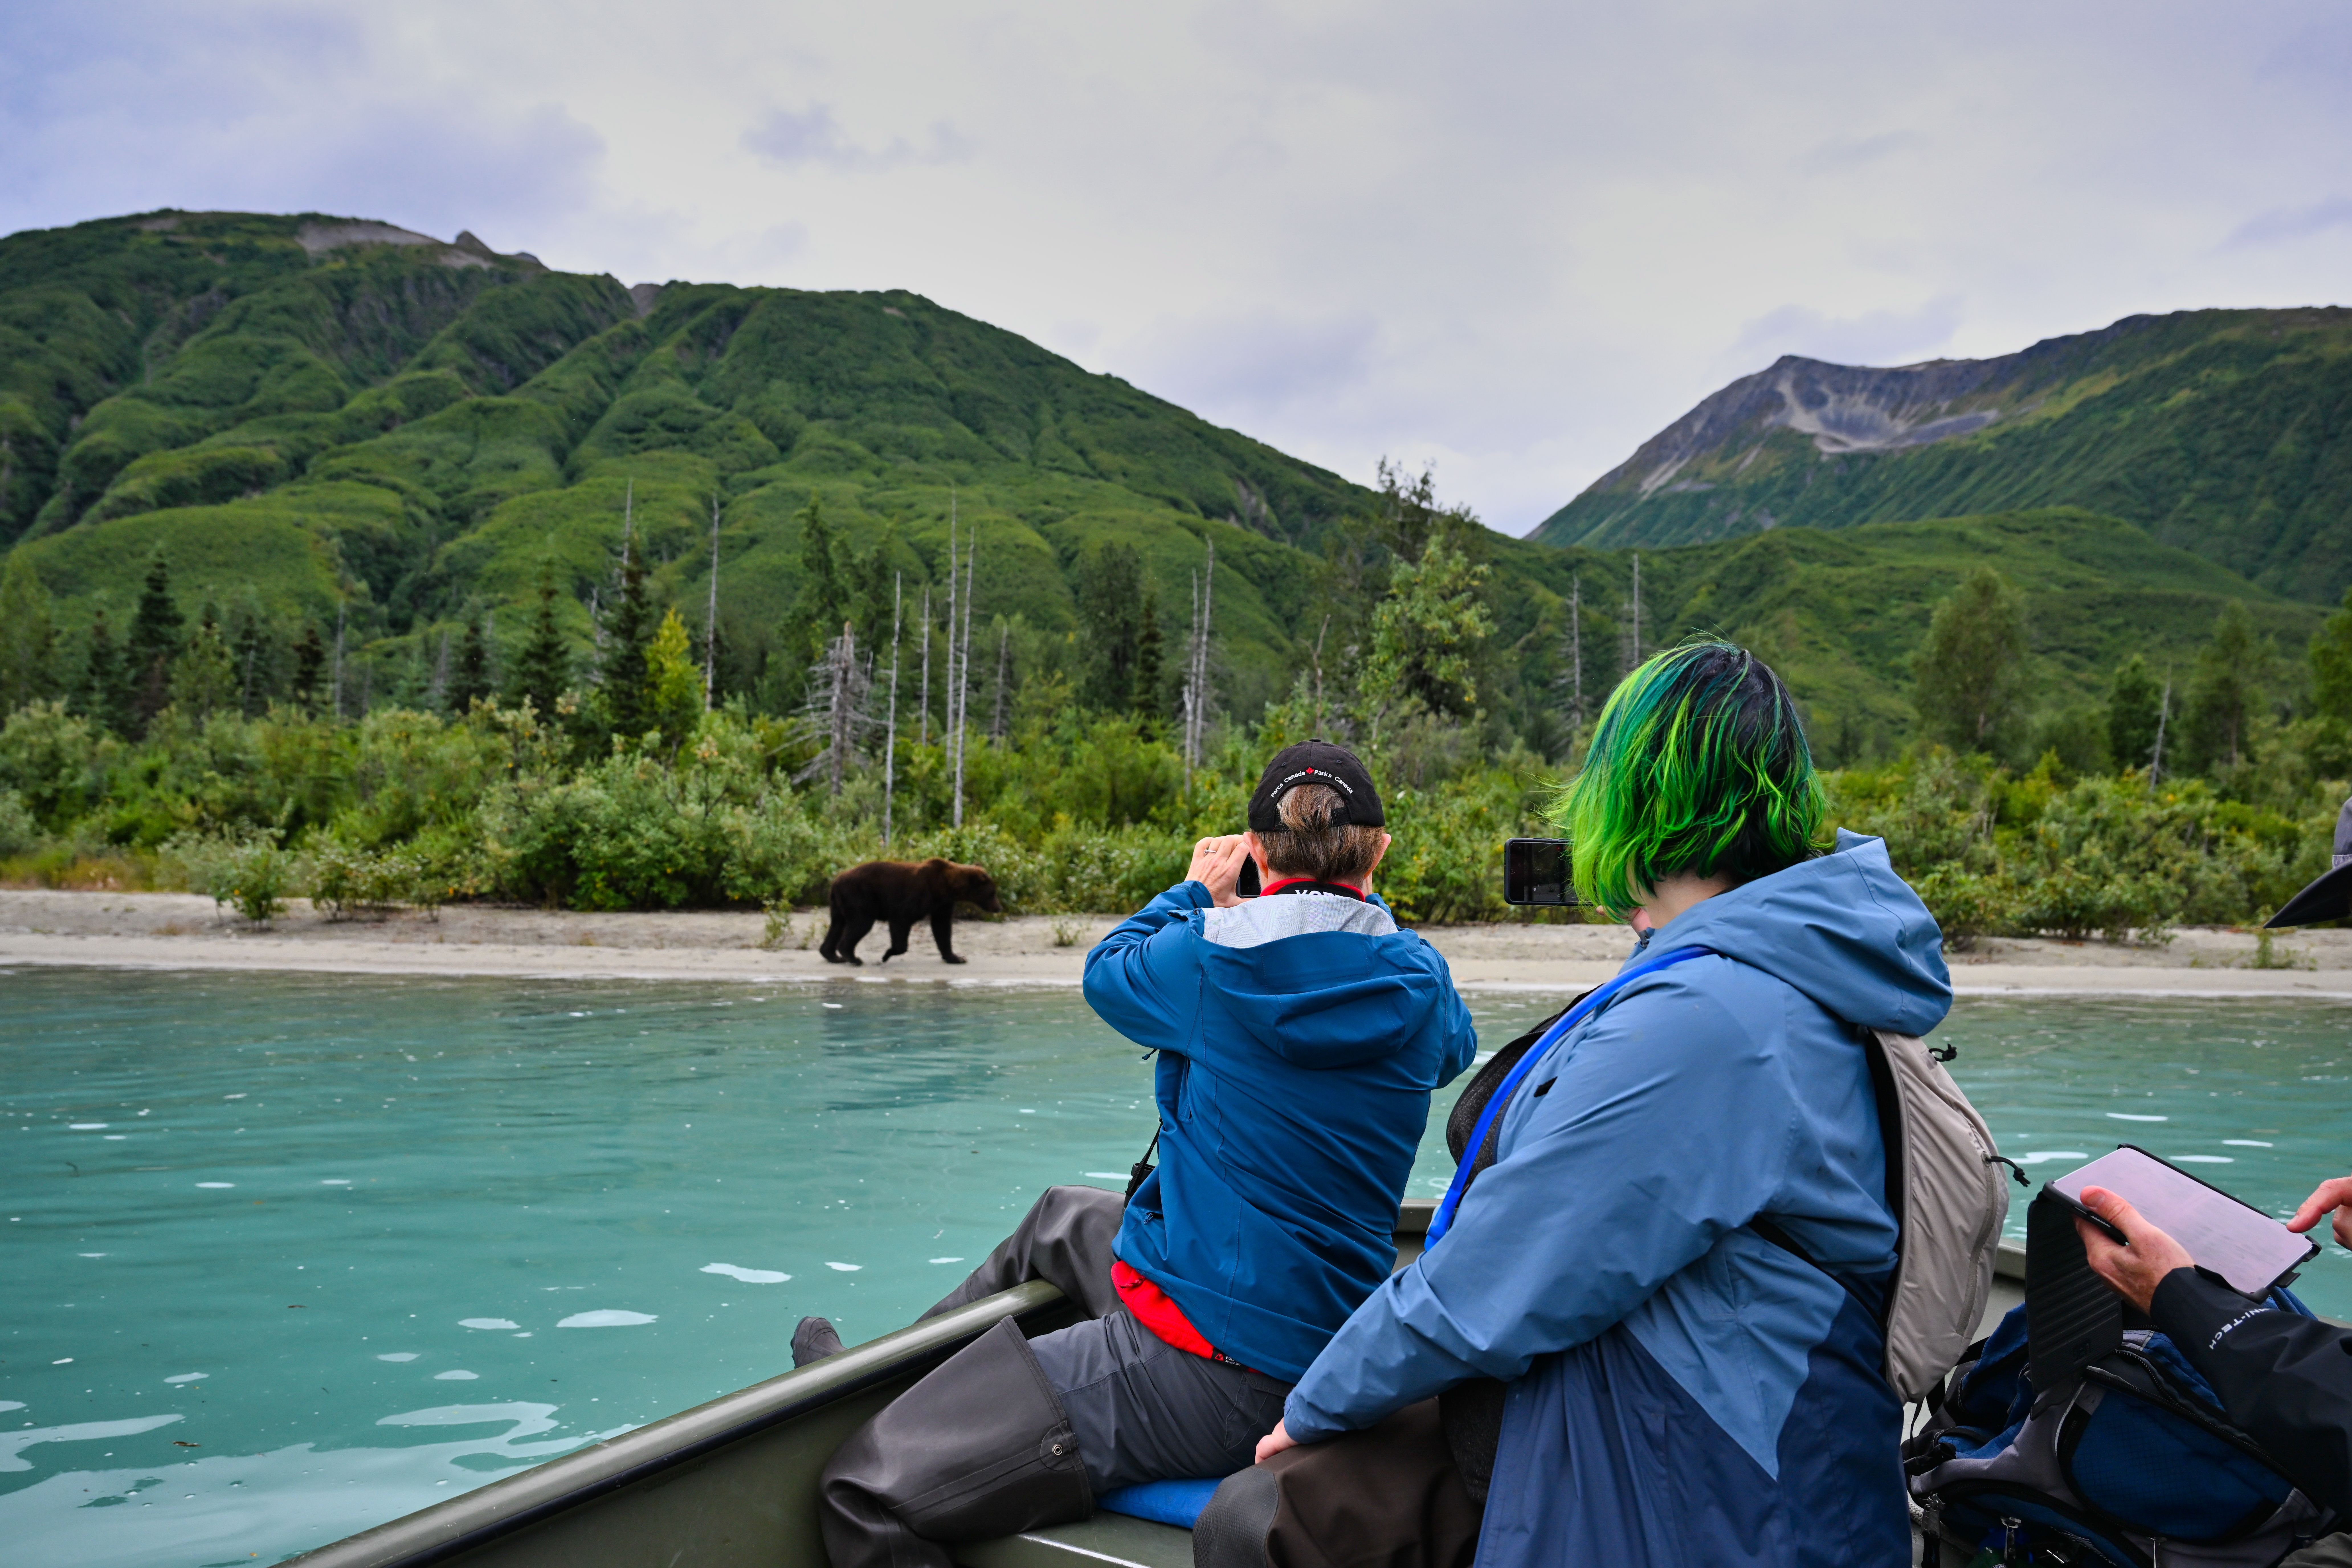 group of people on a boat taking pictures of bear 2023 11 27 05 12 56 utc